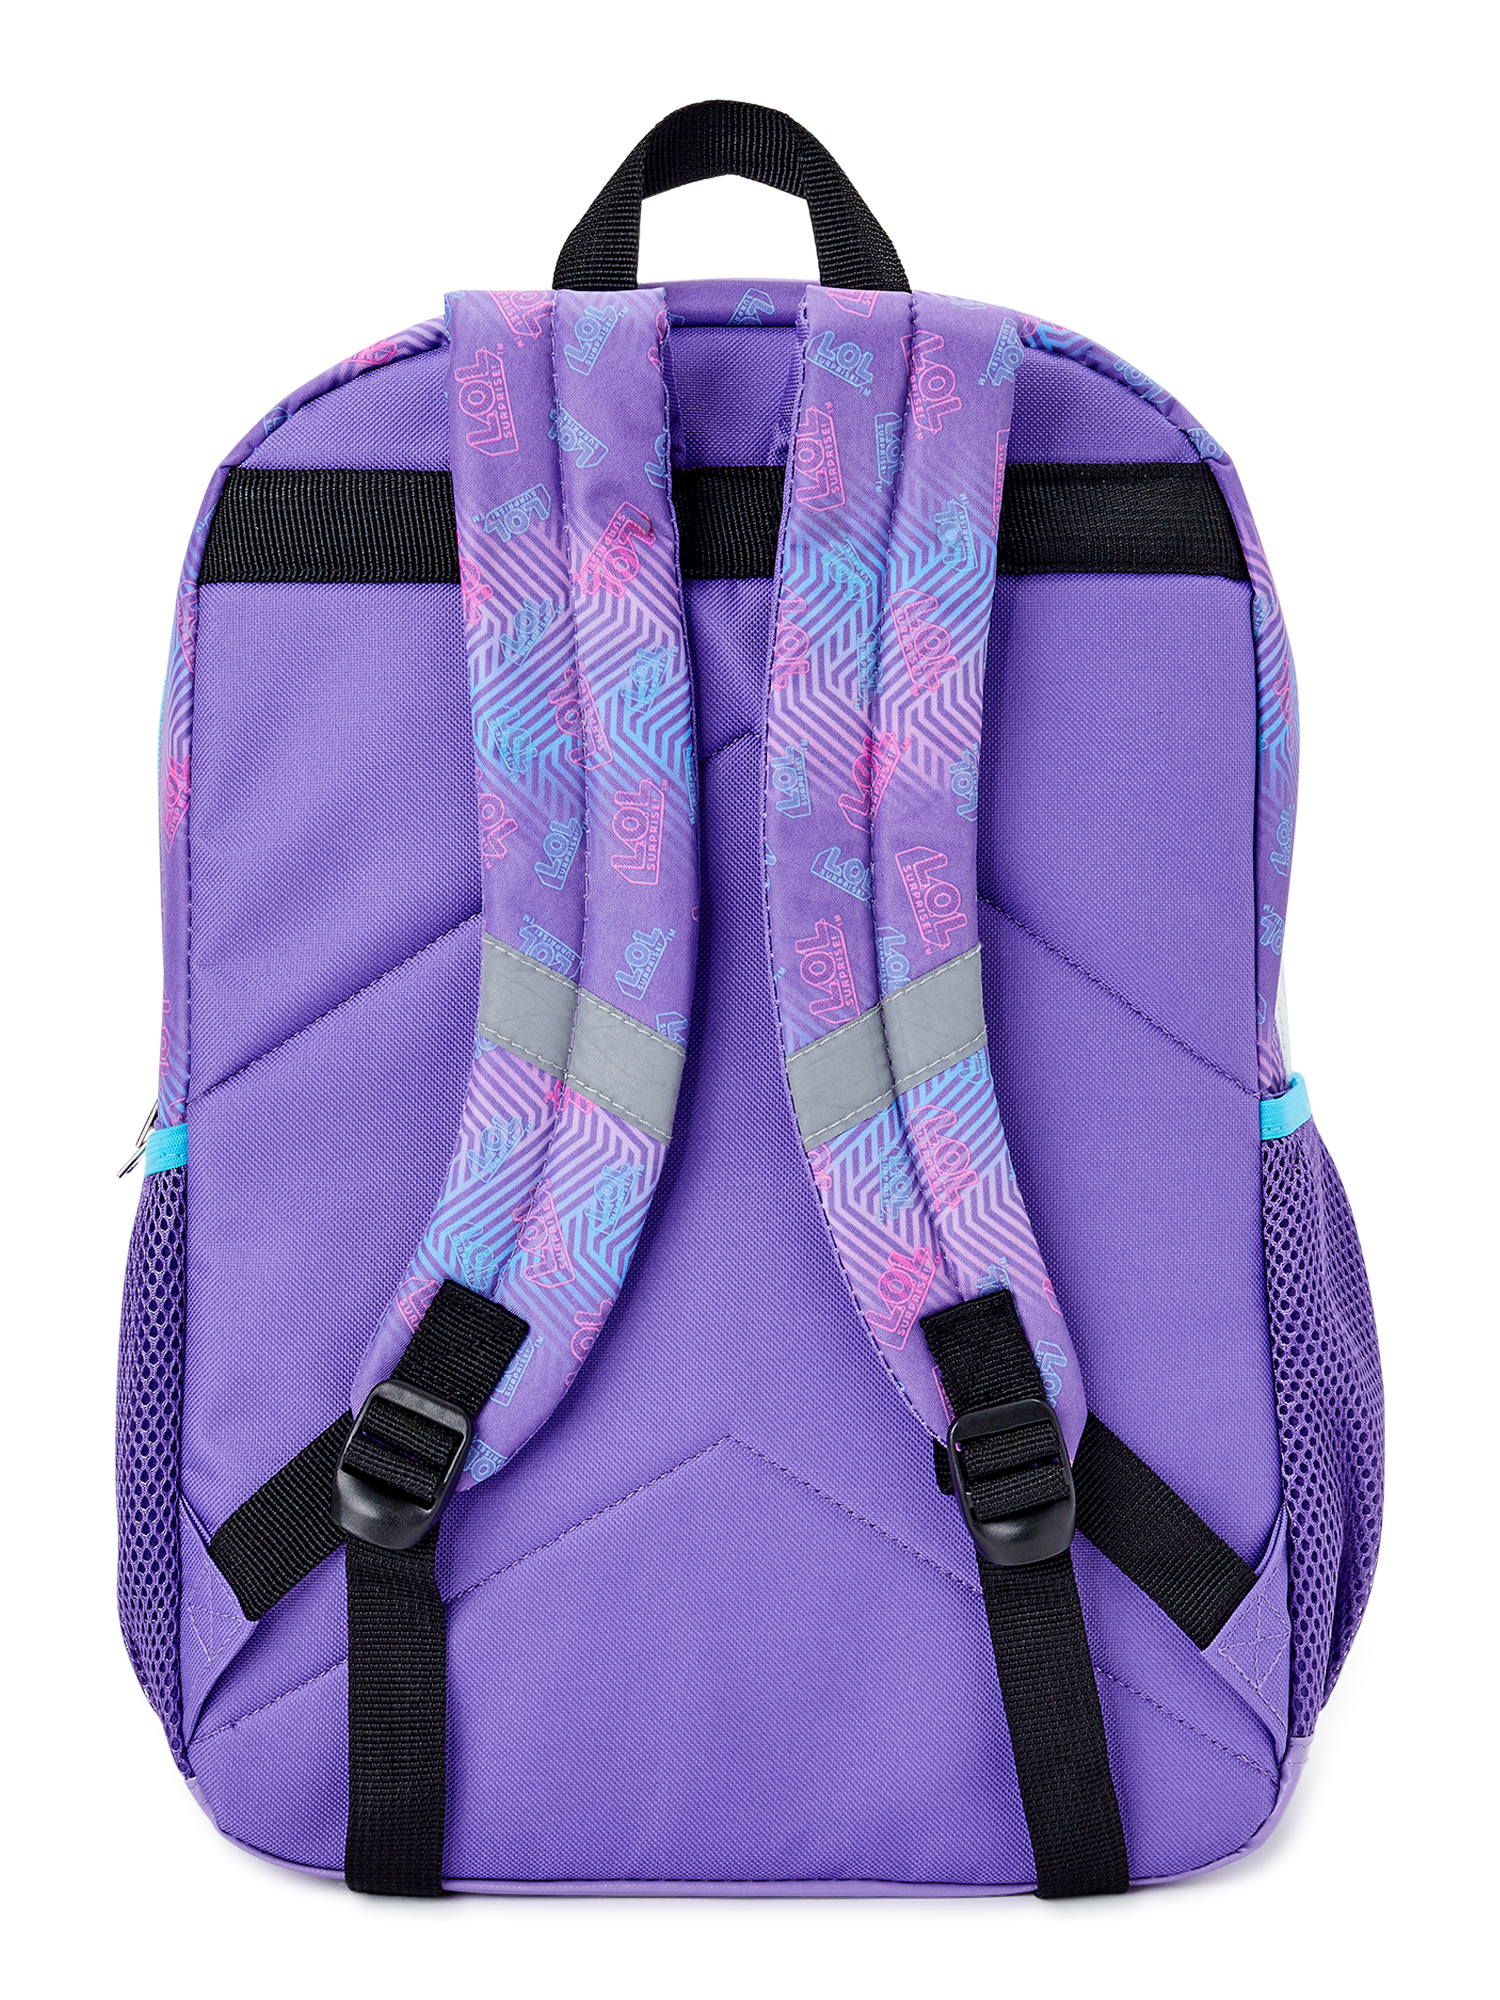 L.O.L. Surprise! Girls' Be Bold Glitter Purple Backpack - image 2 of 6